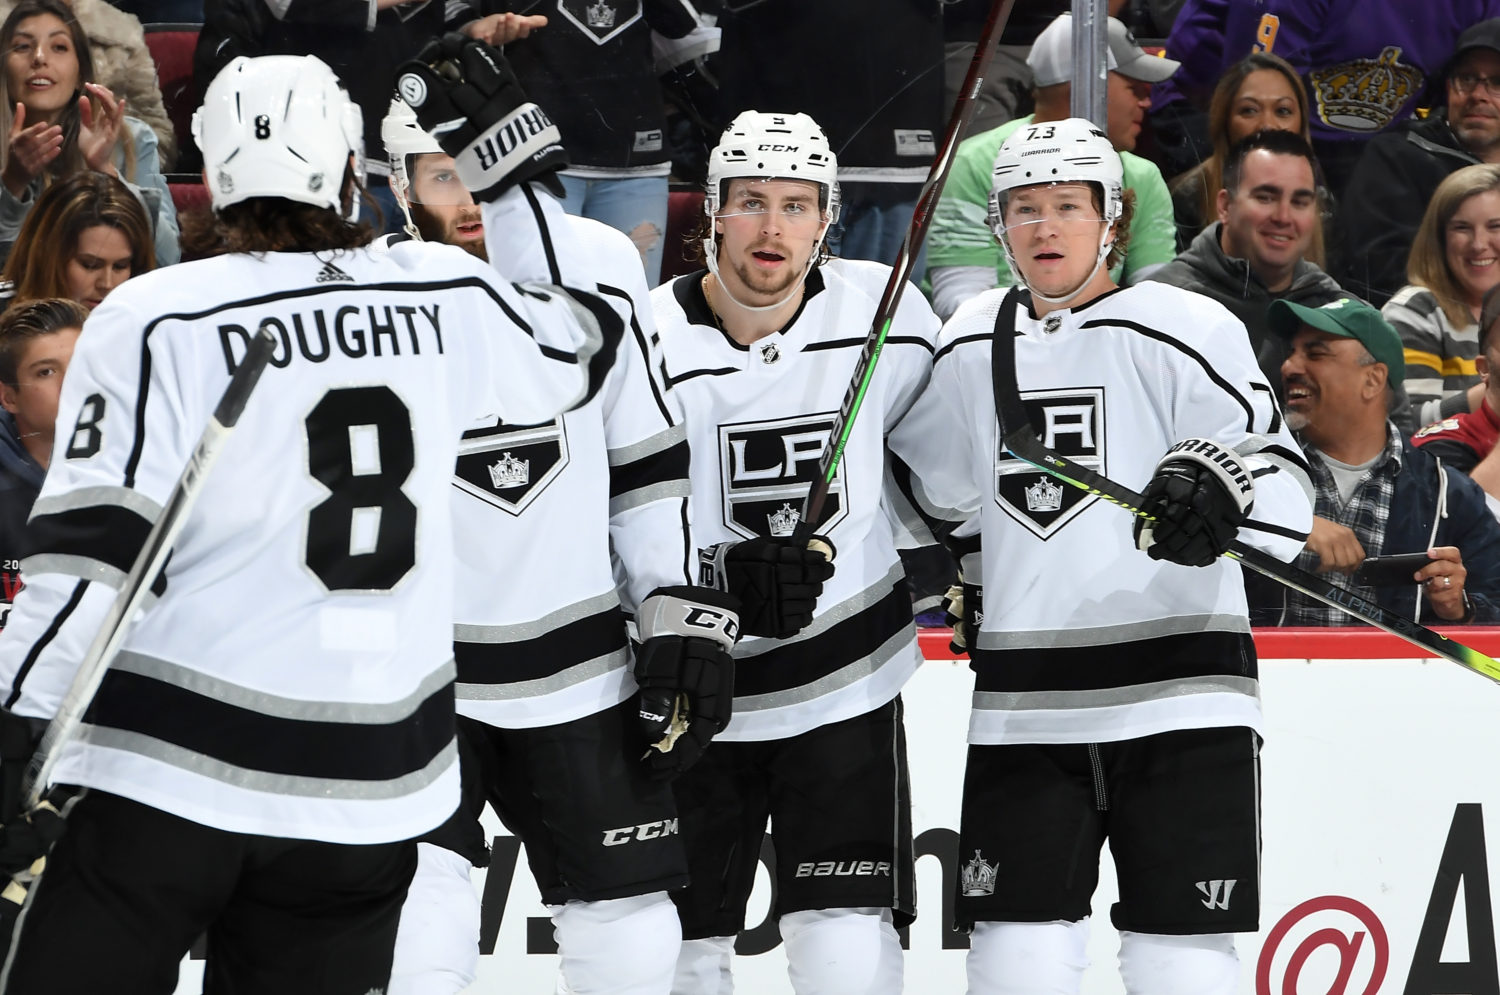 Adrian Kempe: Why does scoring make him so unhappy? - LA Kings Insider